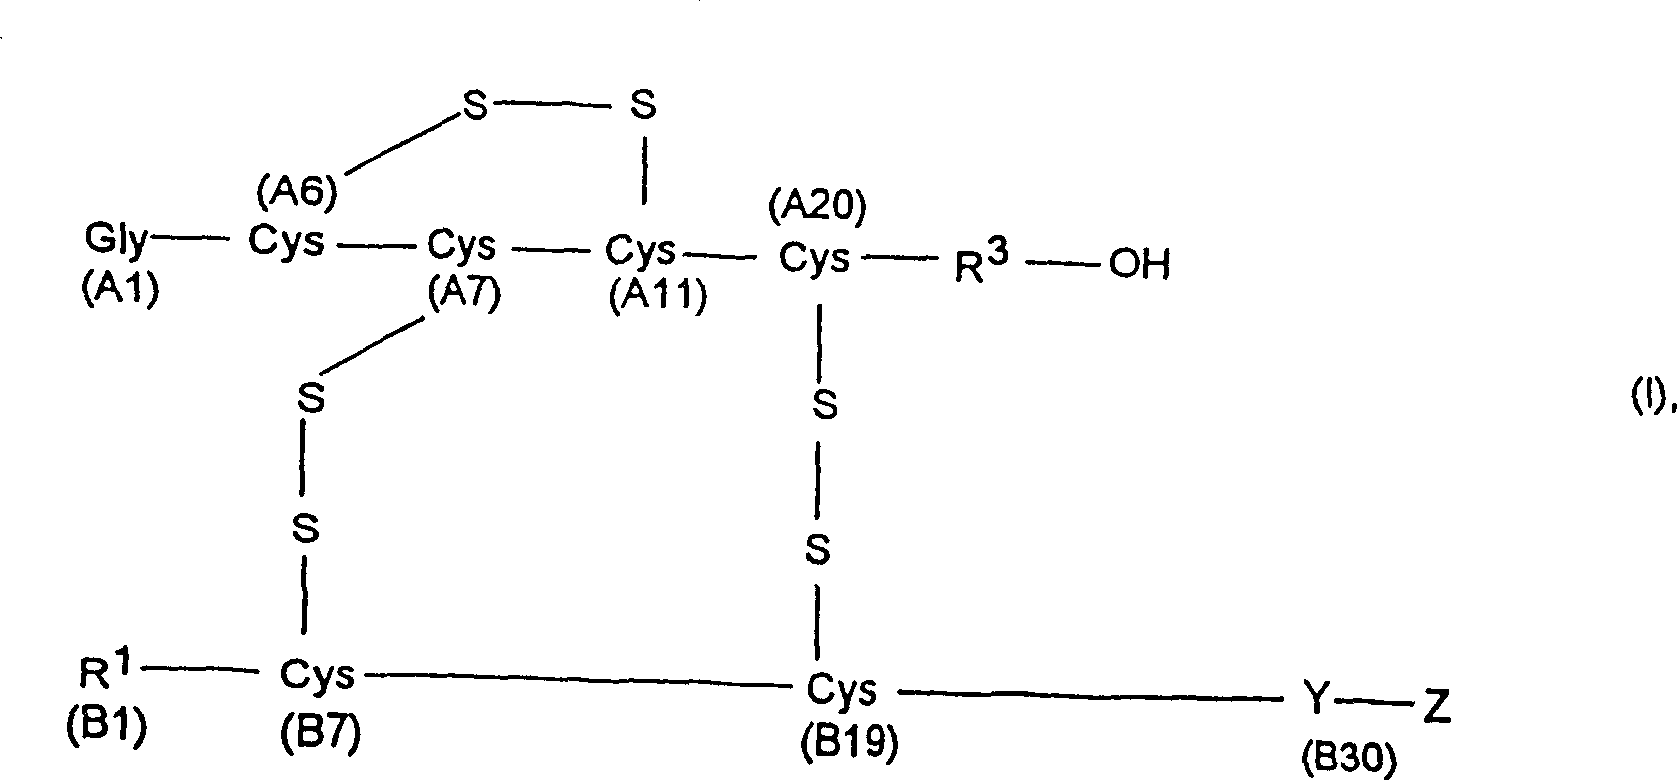 Process for obtaining insulin or insulin derivatives having correctly bonded cystine bridges